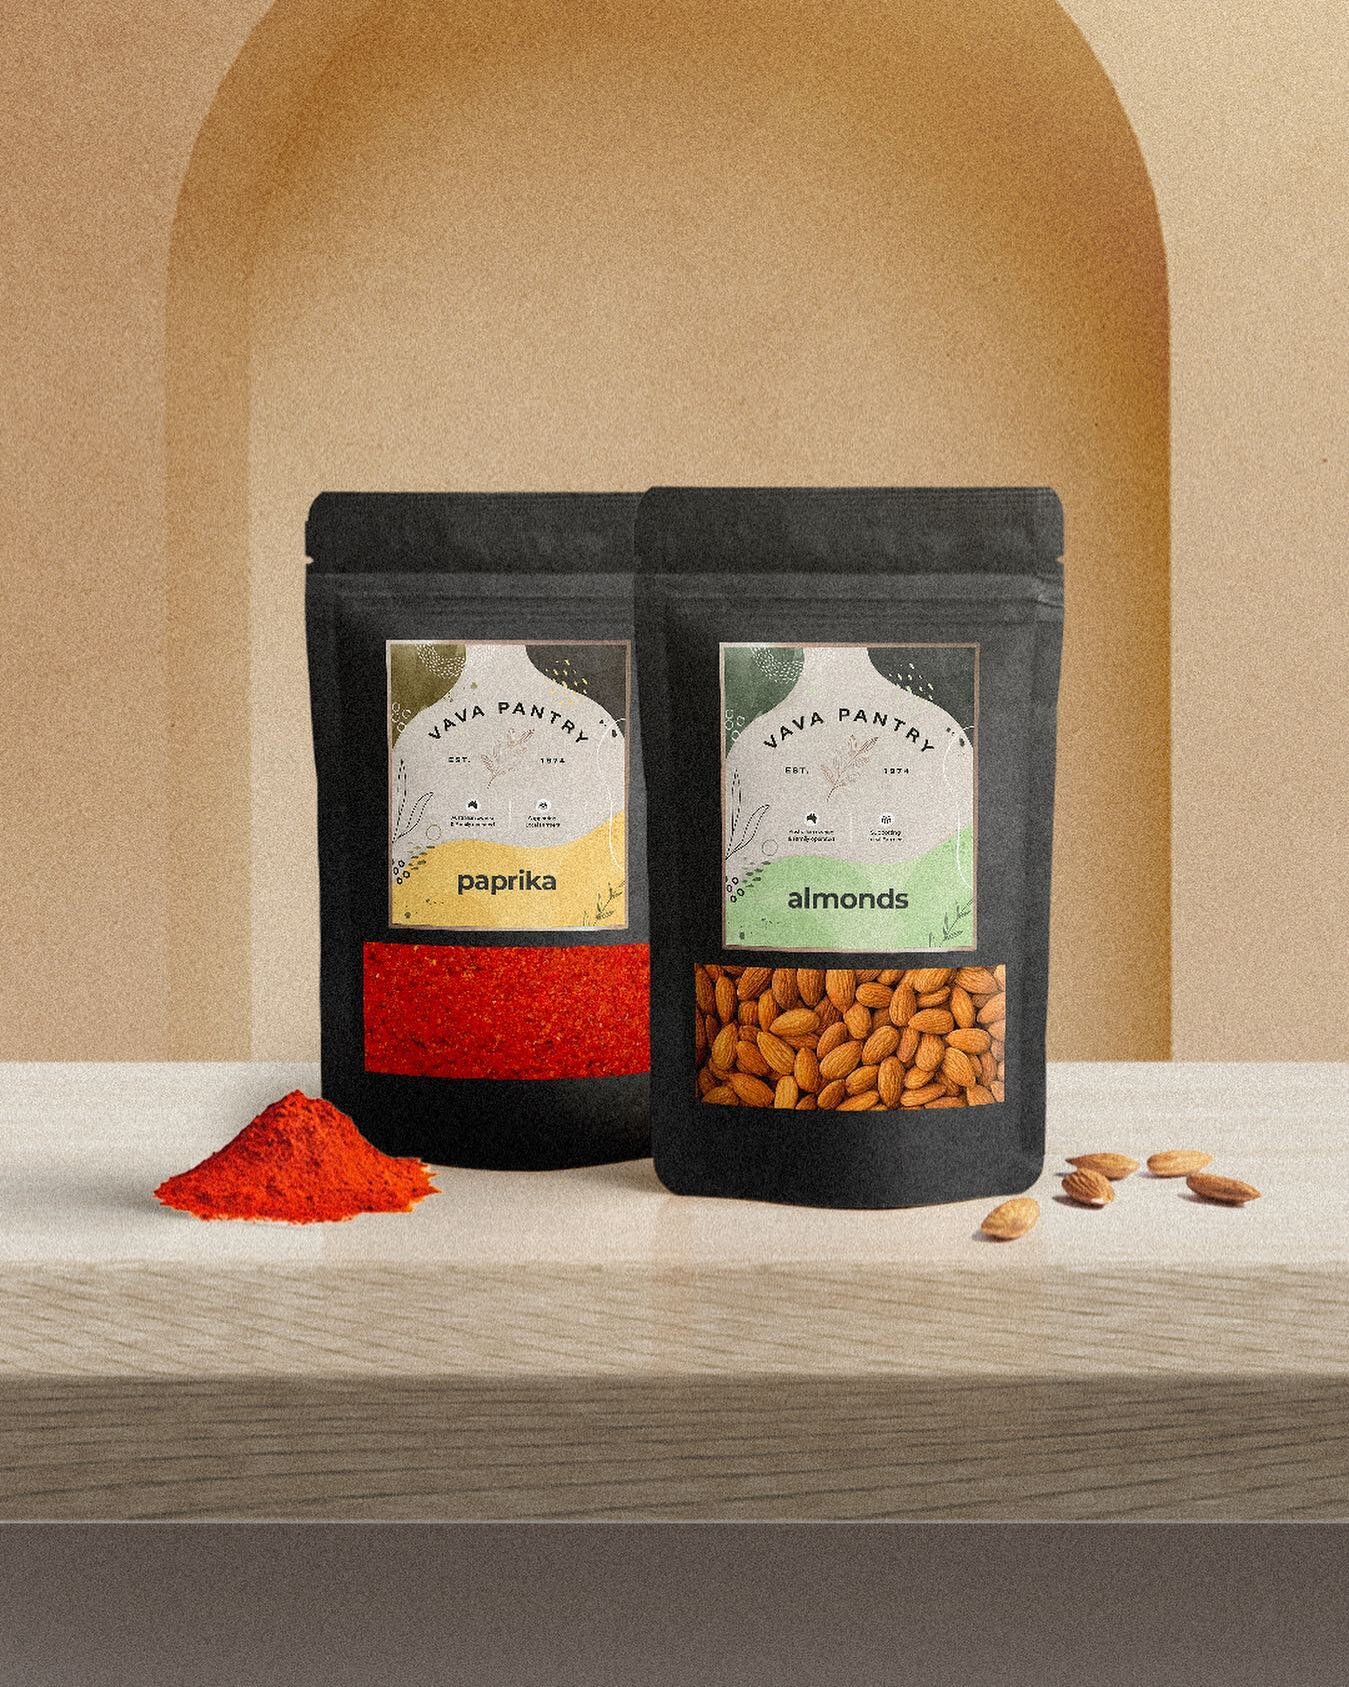 Package design for over 850 products collected into 9 main categories.
Nuts, dried fruit, health/superfoods, legumes/grains, flour/cereal, nut butters, spices/seasonings, specialty grocery items, snacks.
@vavapantry 
#brand #brandidentity #packaging 